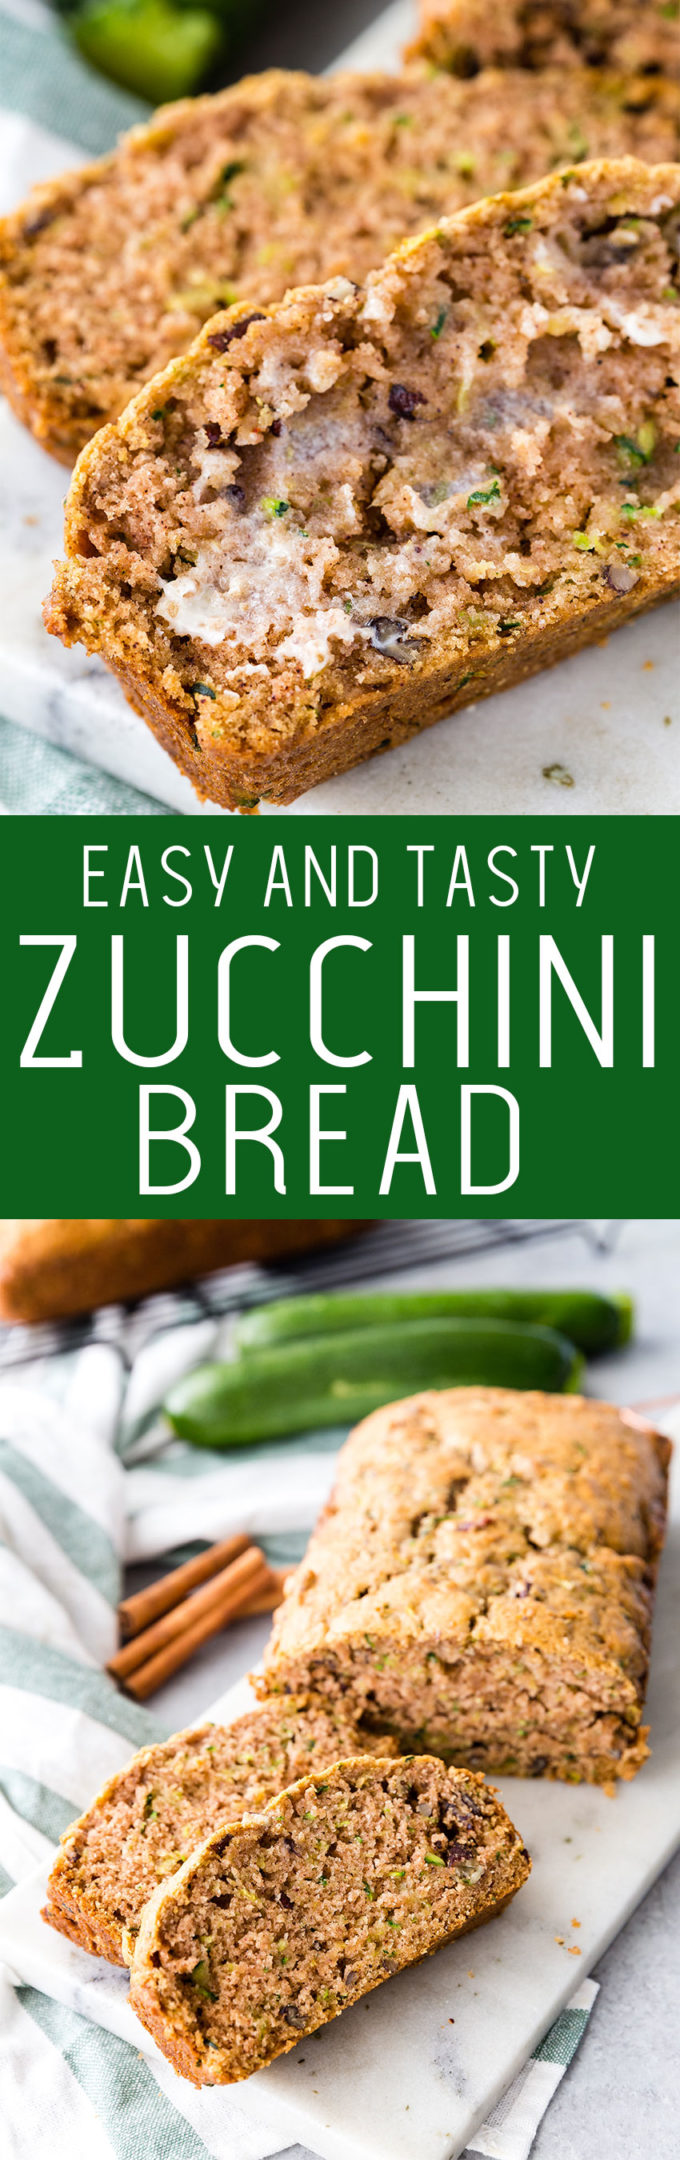 Easy zucchini bread packed with flavor, the perfect recipe